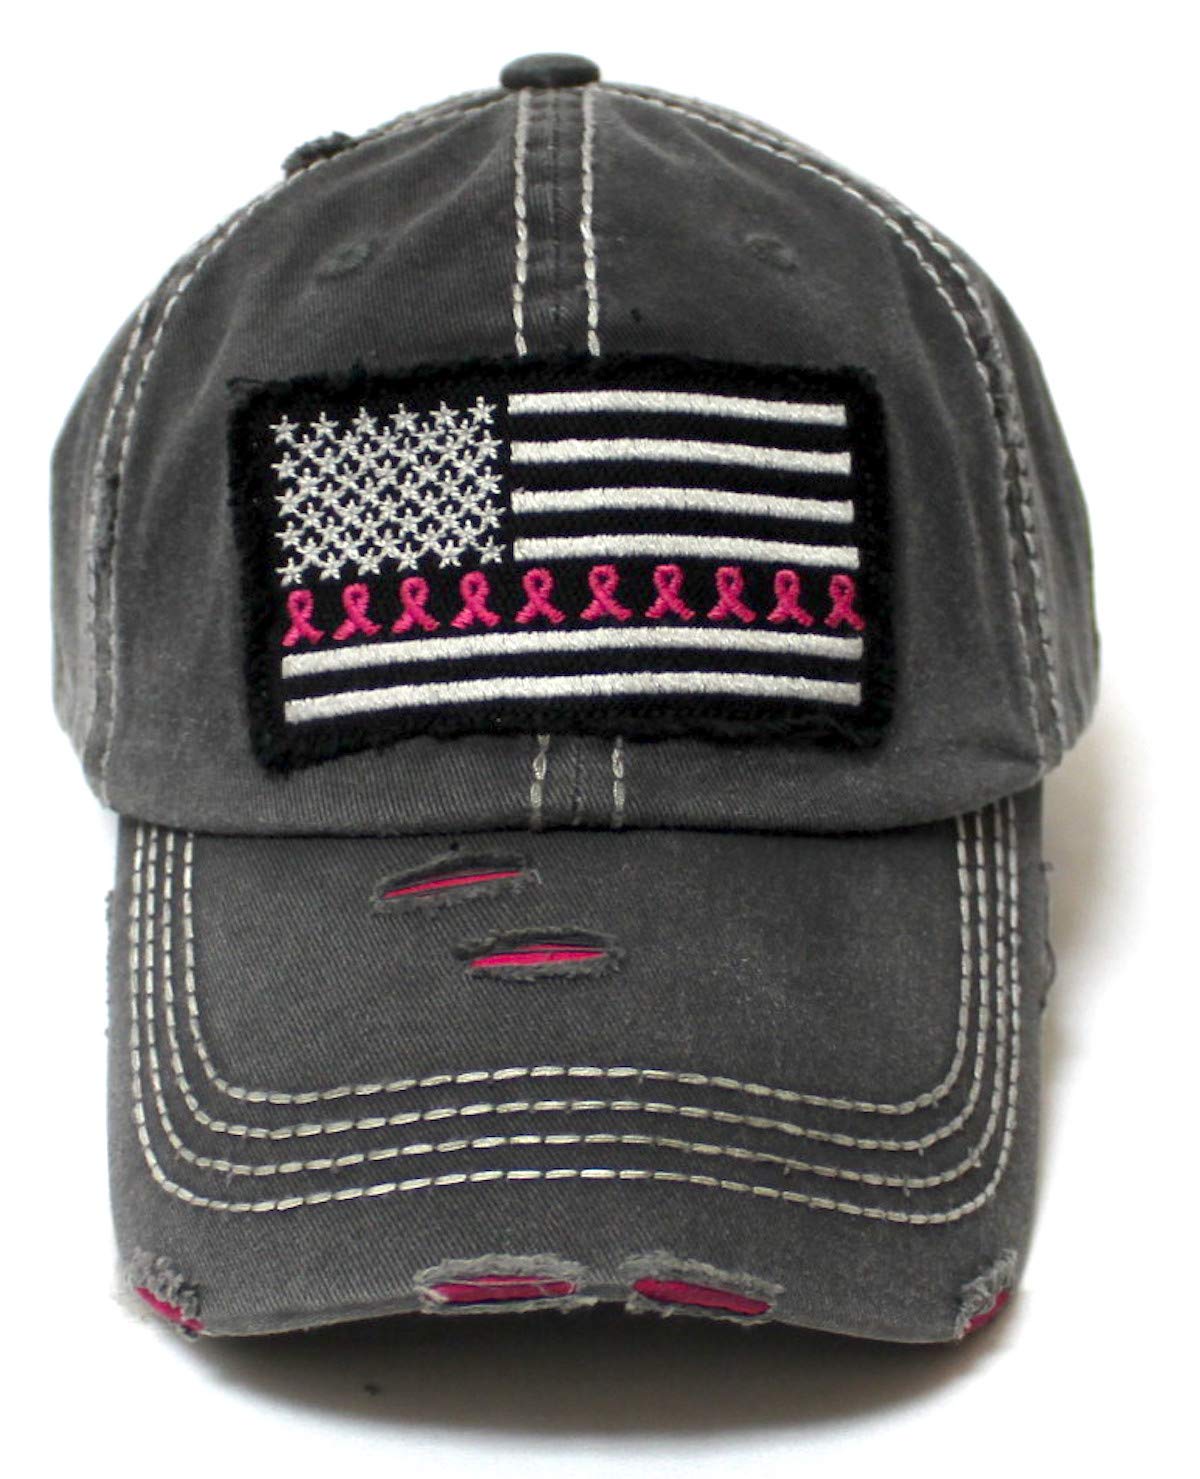 Women's Breast Cancer Awareness Baseball Cap American Flag, Pink Ribbons Patch Embroidery Monogram Hat, Vintage Black